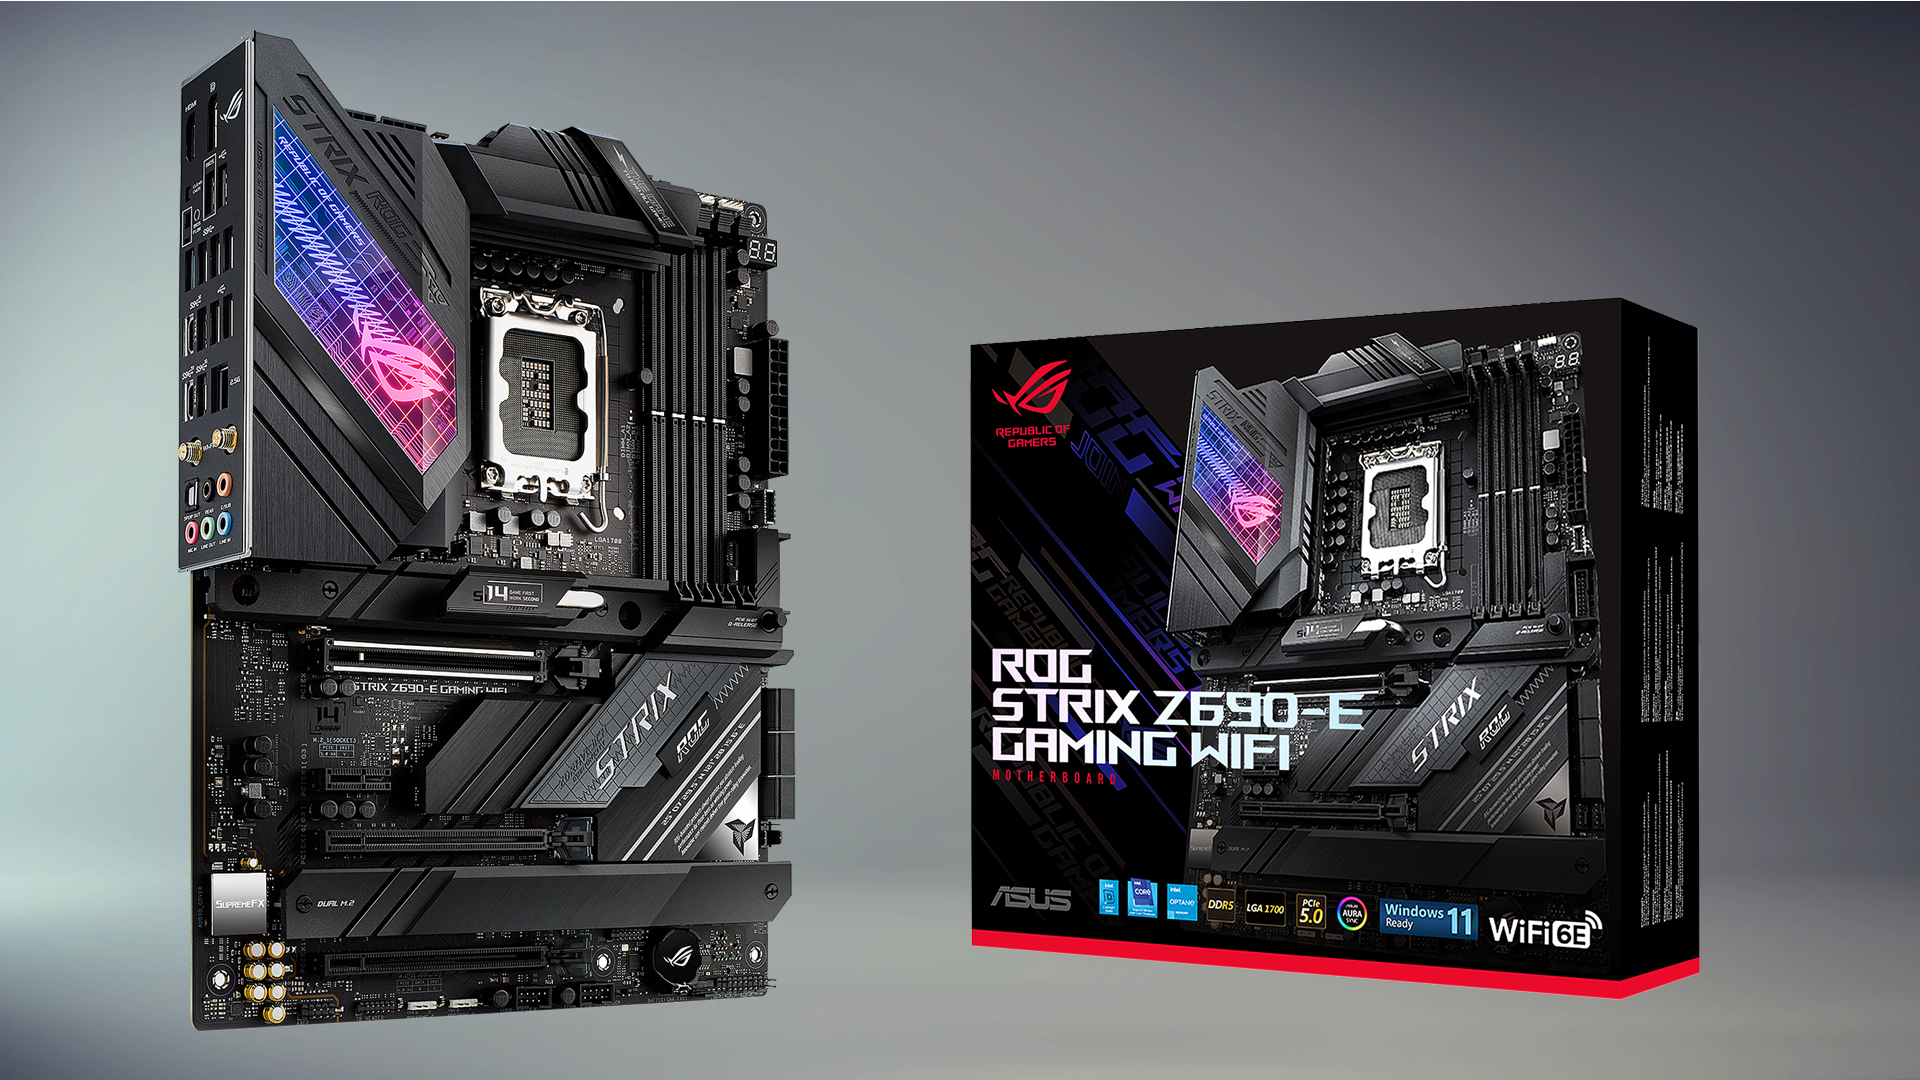 Asus ROG Strix Z E Gaming WiFi Review: PCIe 5.0 M.2 and